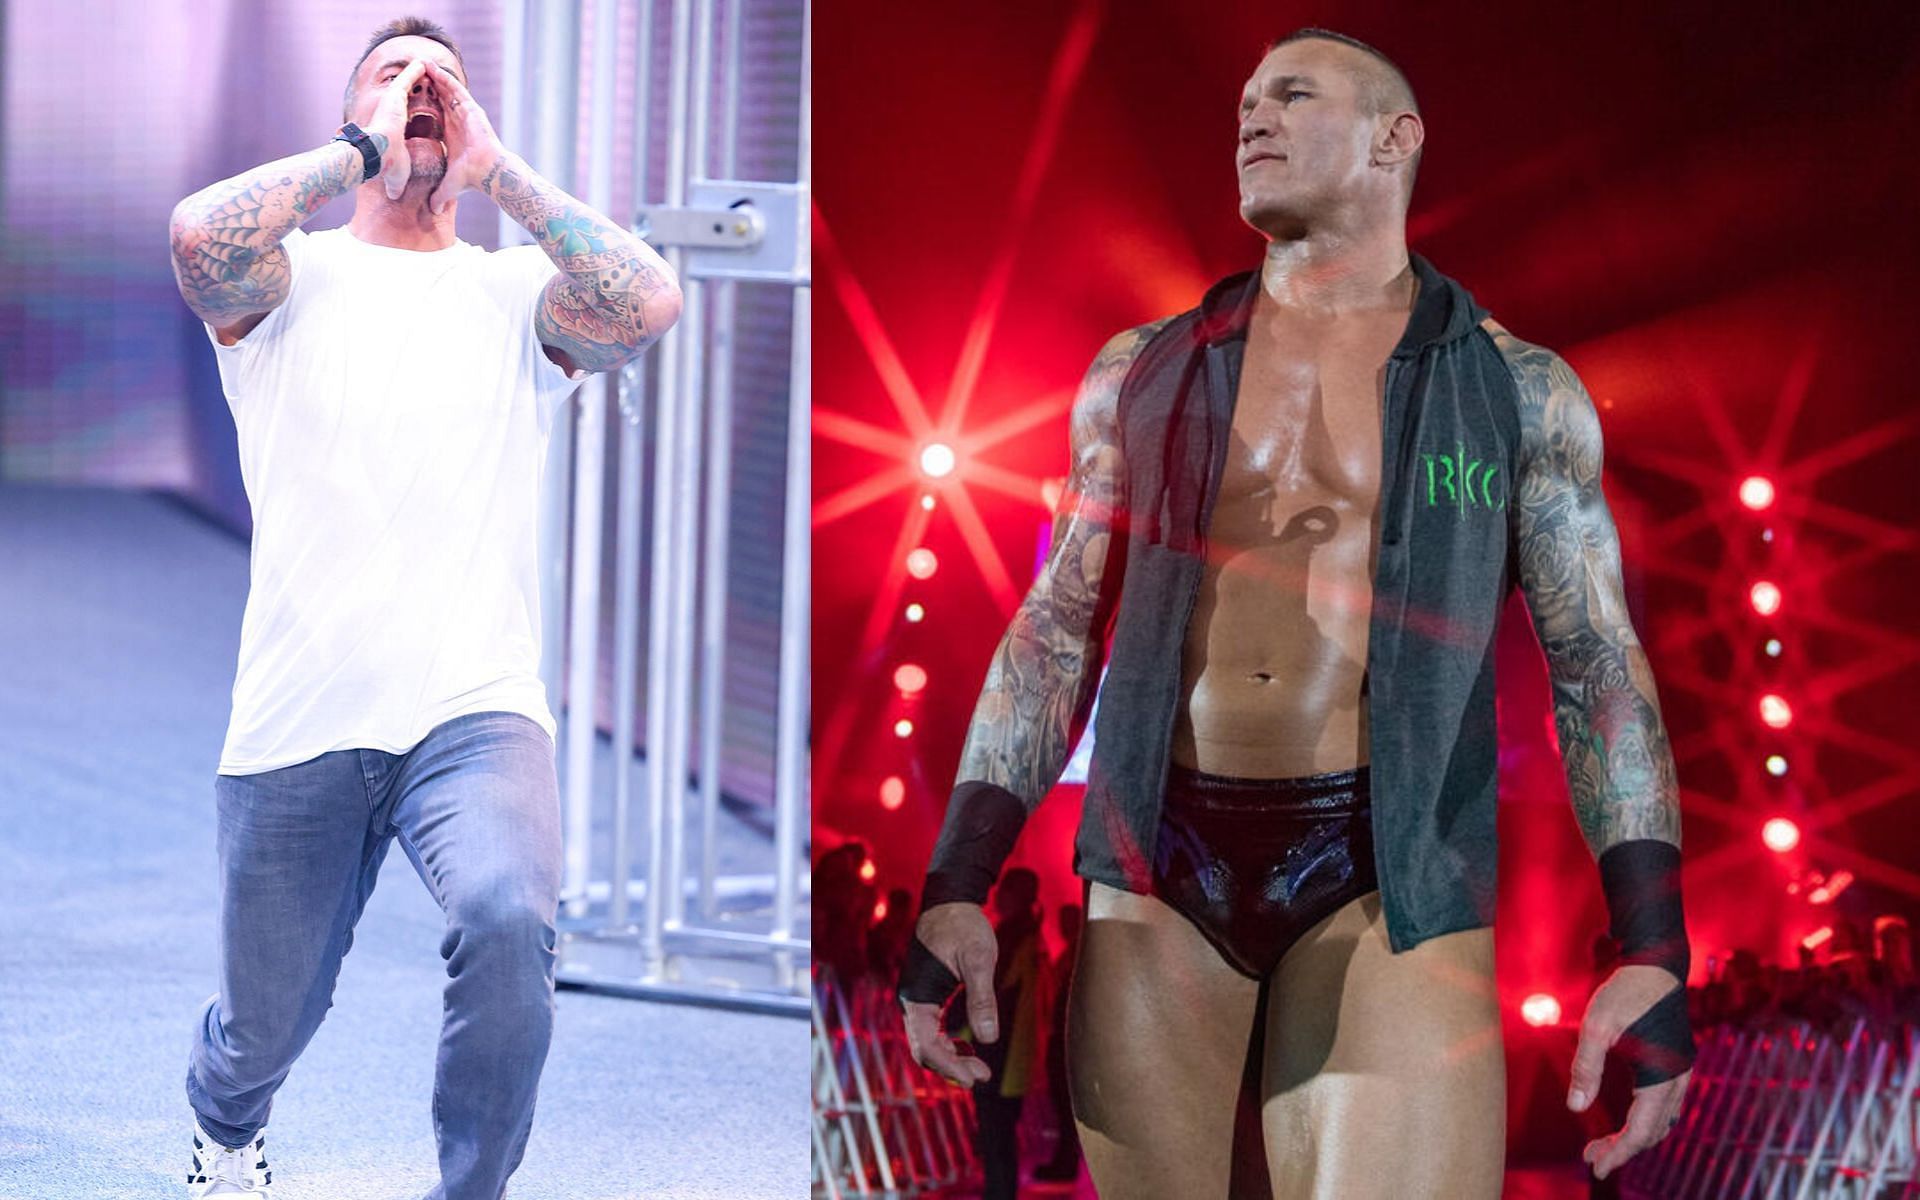 CM Punk and Randy Orton could capture gold in the near future!